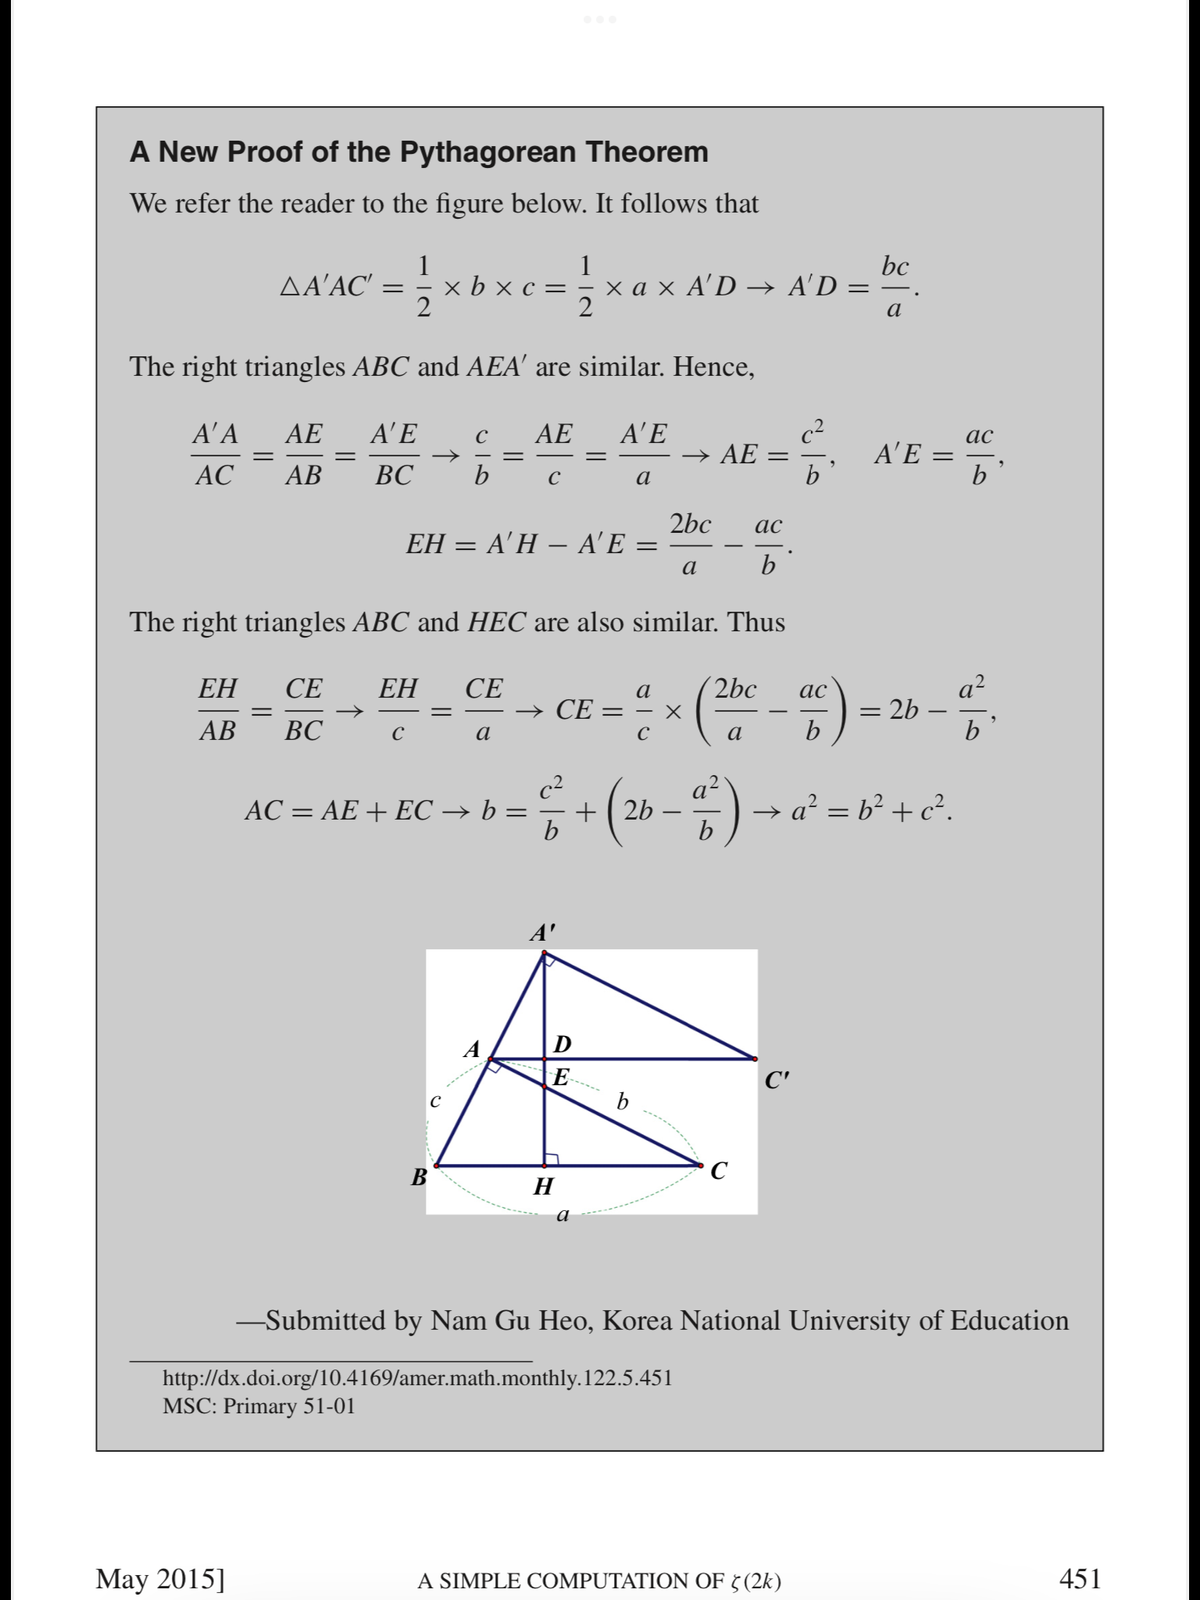 A New Proof of the Pythagorean Theorem
We refer the reader to the figure below. It follows that
bc
1
x b x c = 5
2
1
x a x A'D –→ A'D = -
2
ΔΑAC
a
The right triangles ABC and AEA' are similar. Hence,
A' E
c2
ΑΕ
b
Α'Α
АЕ
АЕ
A'E
ас
A'E =
b
АС
АВ
ВС
b
C
a
2bc
ΕΗ-Α'Η - A'E =
ас
a
b
The right triangles ABC and HEC are also similar. Thus
- CE = " × ( - ) = 26 -
a?
= 2b -
b
ЕН
СЕ
ЕН
СЕ
a
2bc
ас
AB
ВС
C
a
b
c2
+( 2b
a?
5)- a' = b° + c?.
AC = AE + EC → b :
D
E
C'
C
b
В
H
а
-Submitted by Nam Gu Heo, Korea National University of Education
http://dx.doi.org/10.4169/amer.math.monthly.122.5.451
MSC: Primary 51-01
May 2015]
A SIMPLE COMPUTATION OF 5(2k)
451
